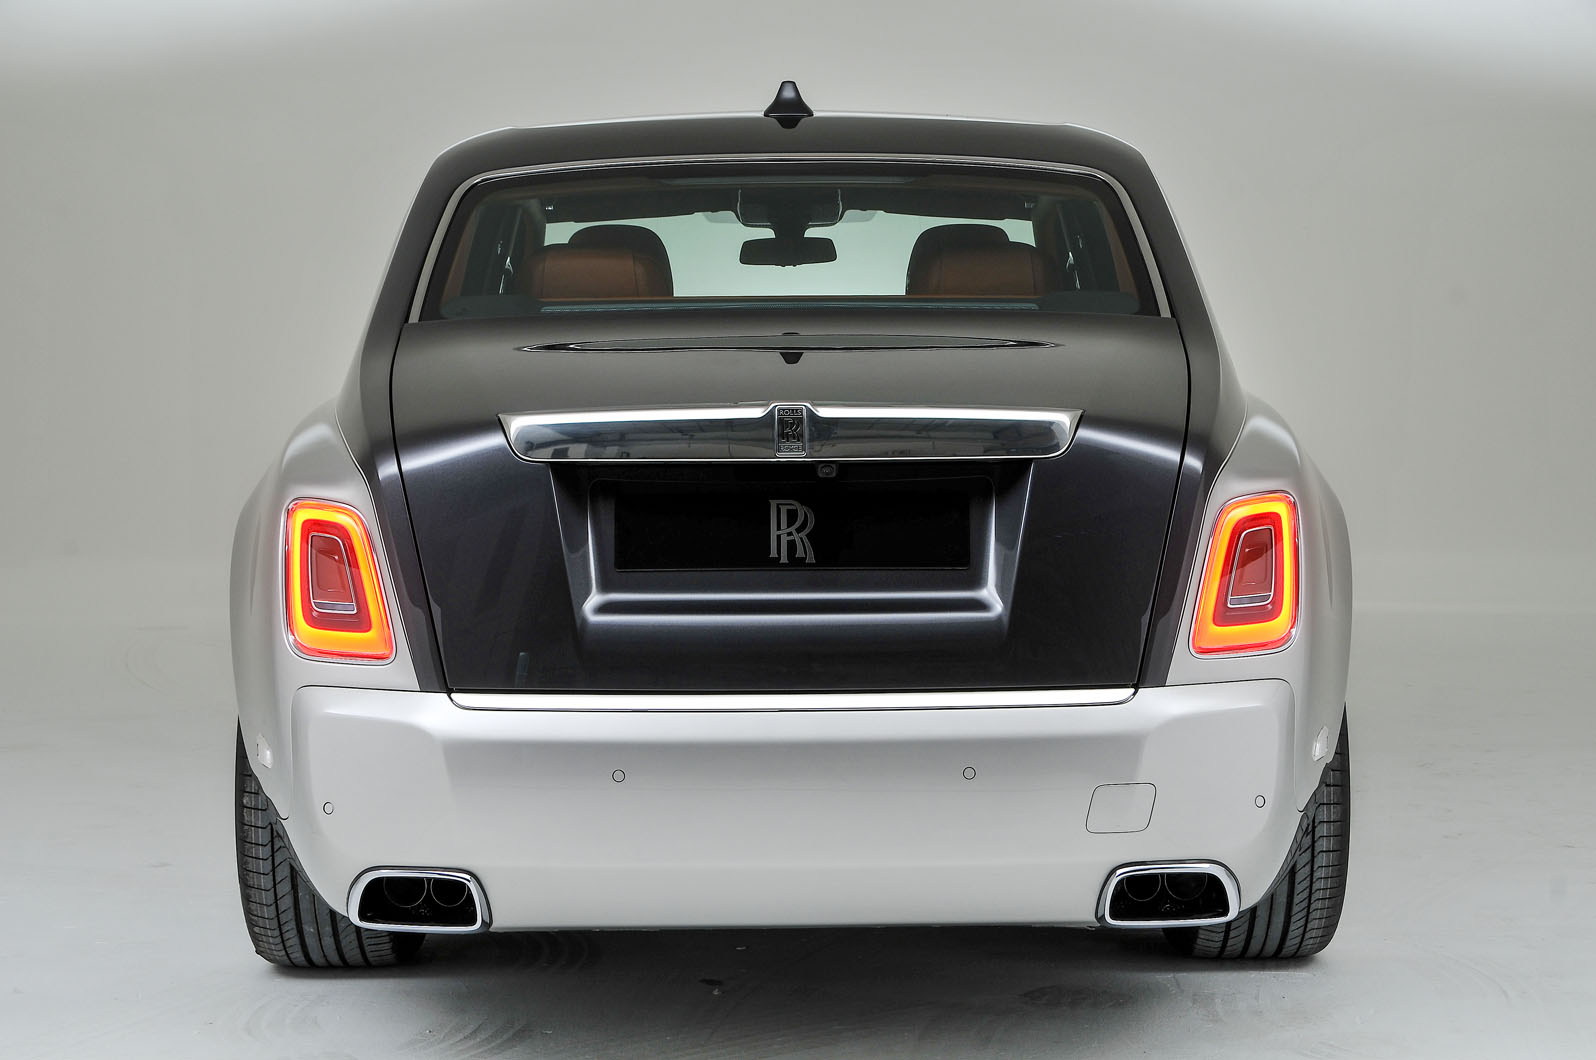 307 Back Of Rolls Royce Stock Photos HighRes Pictures and Images  Getty  Images